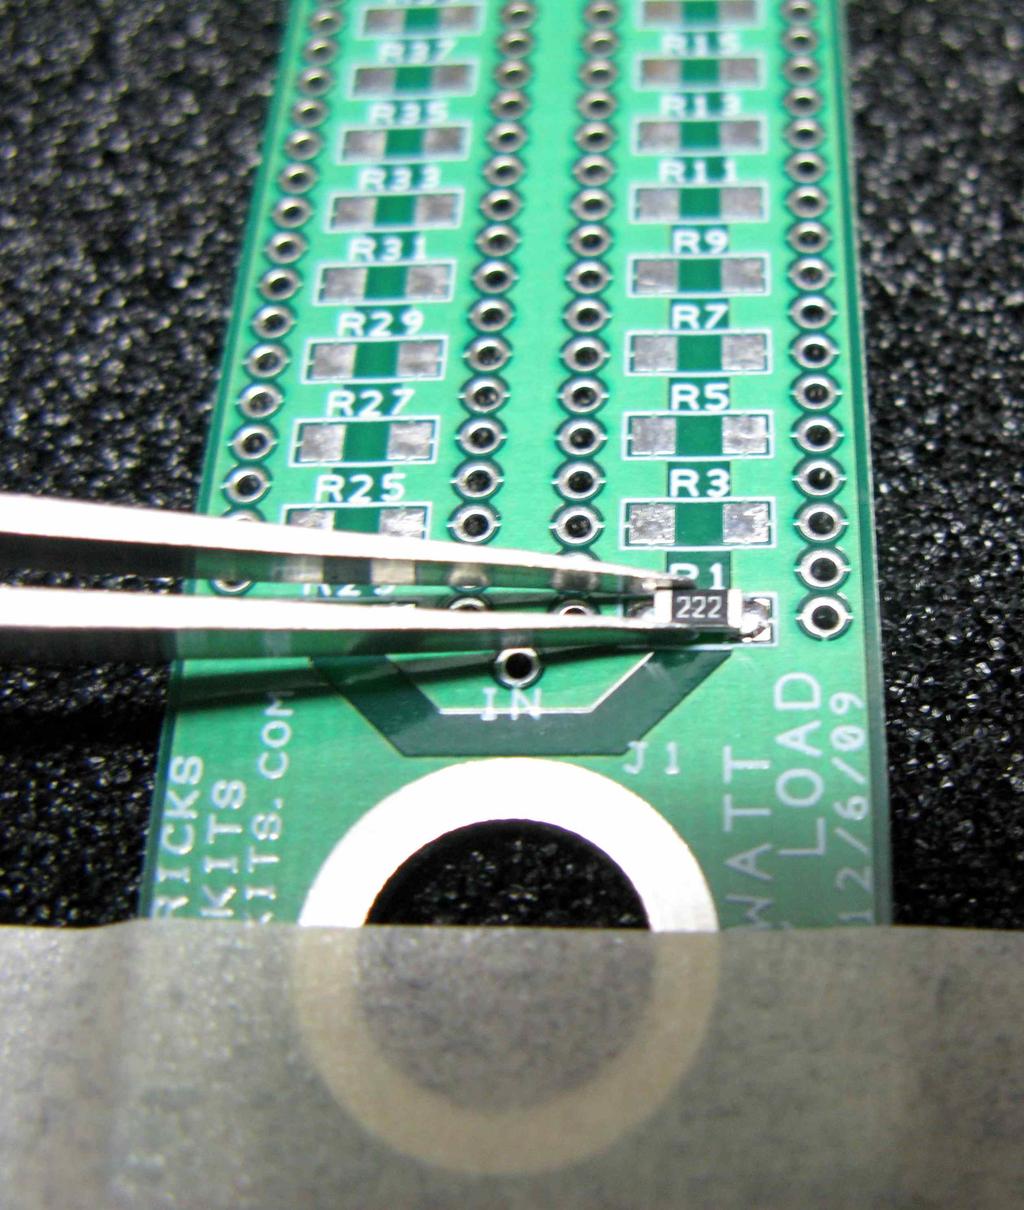 You should feel the resistor settle in place as the solder melts. Now you can now solder the left side of the resistor. Repeat this process for all the odd numbered resistors on this side.